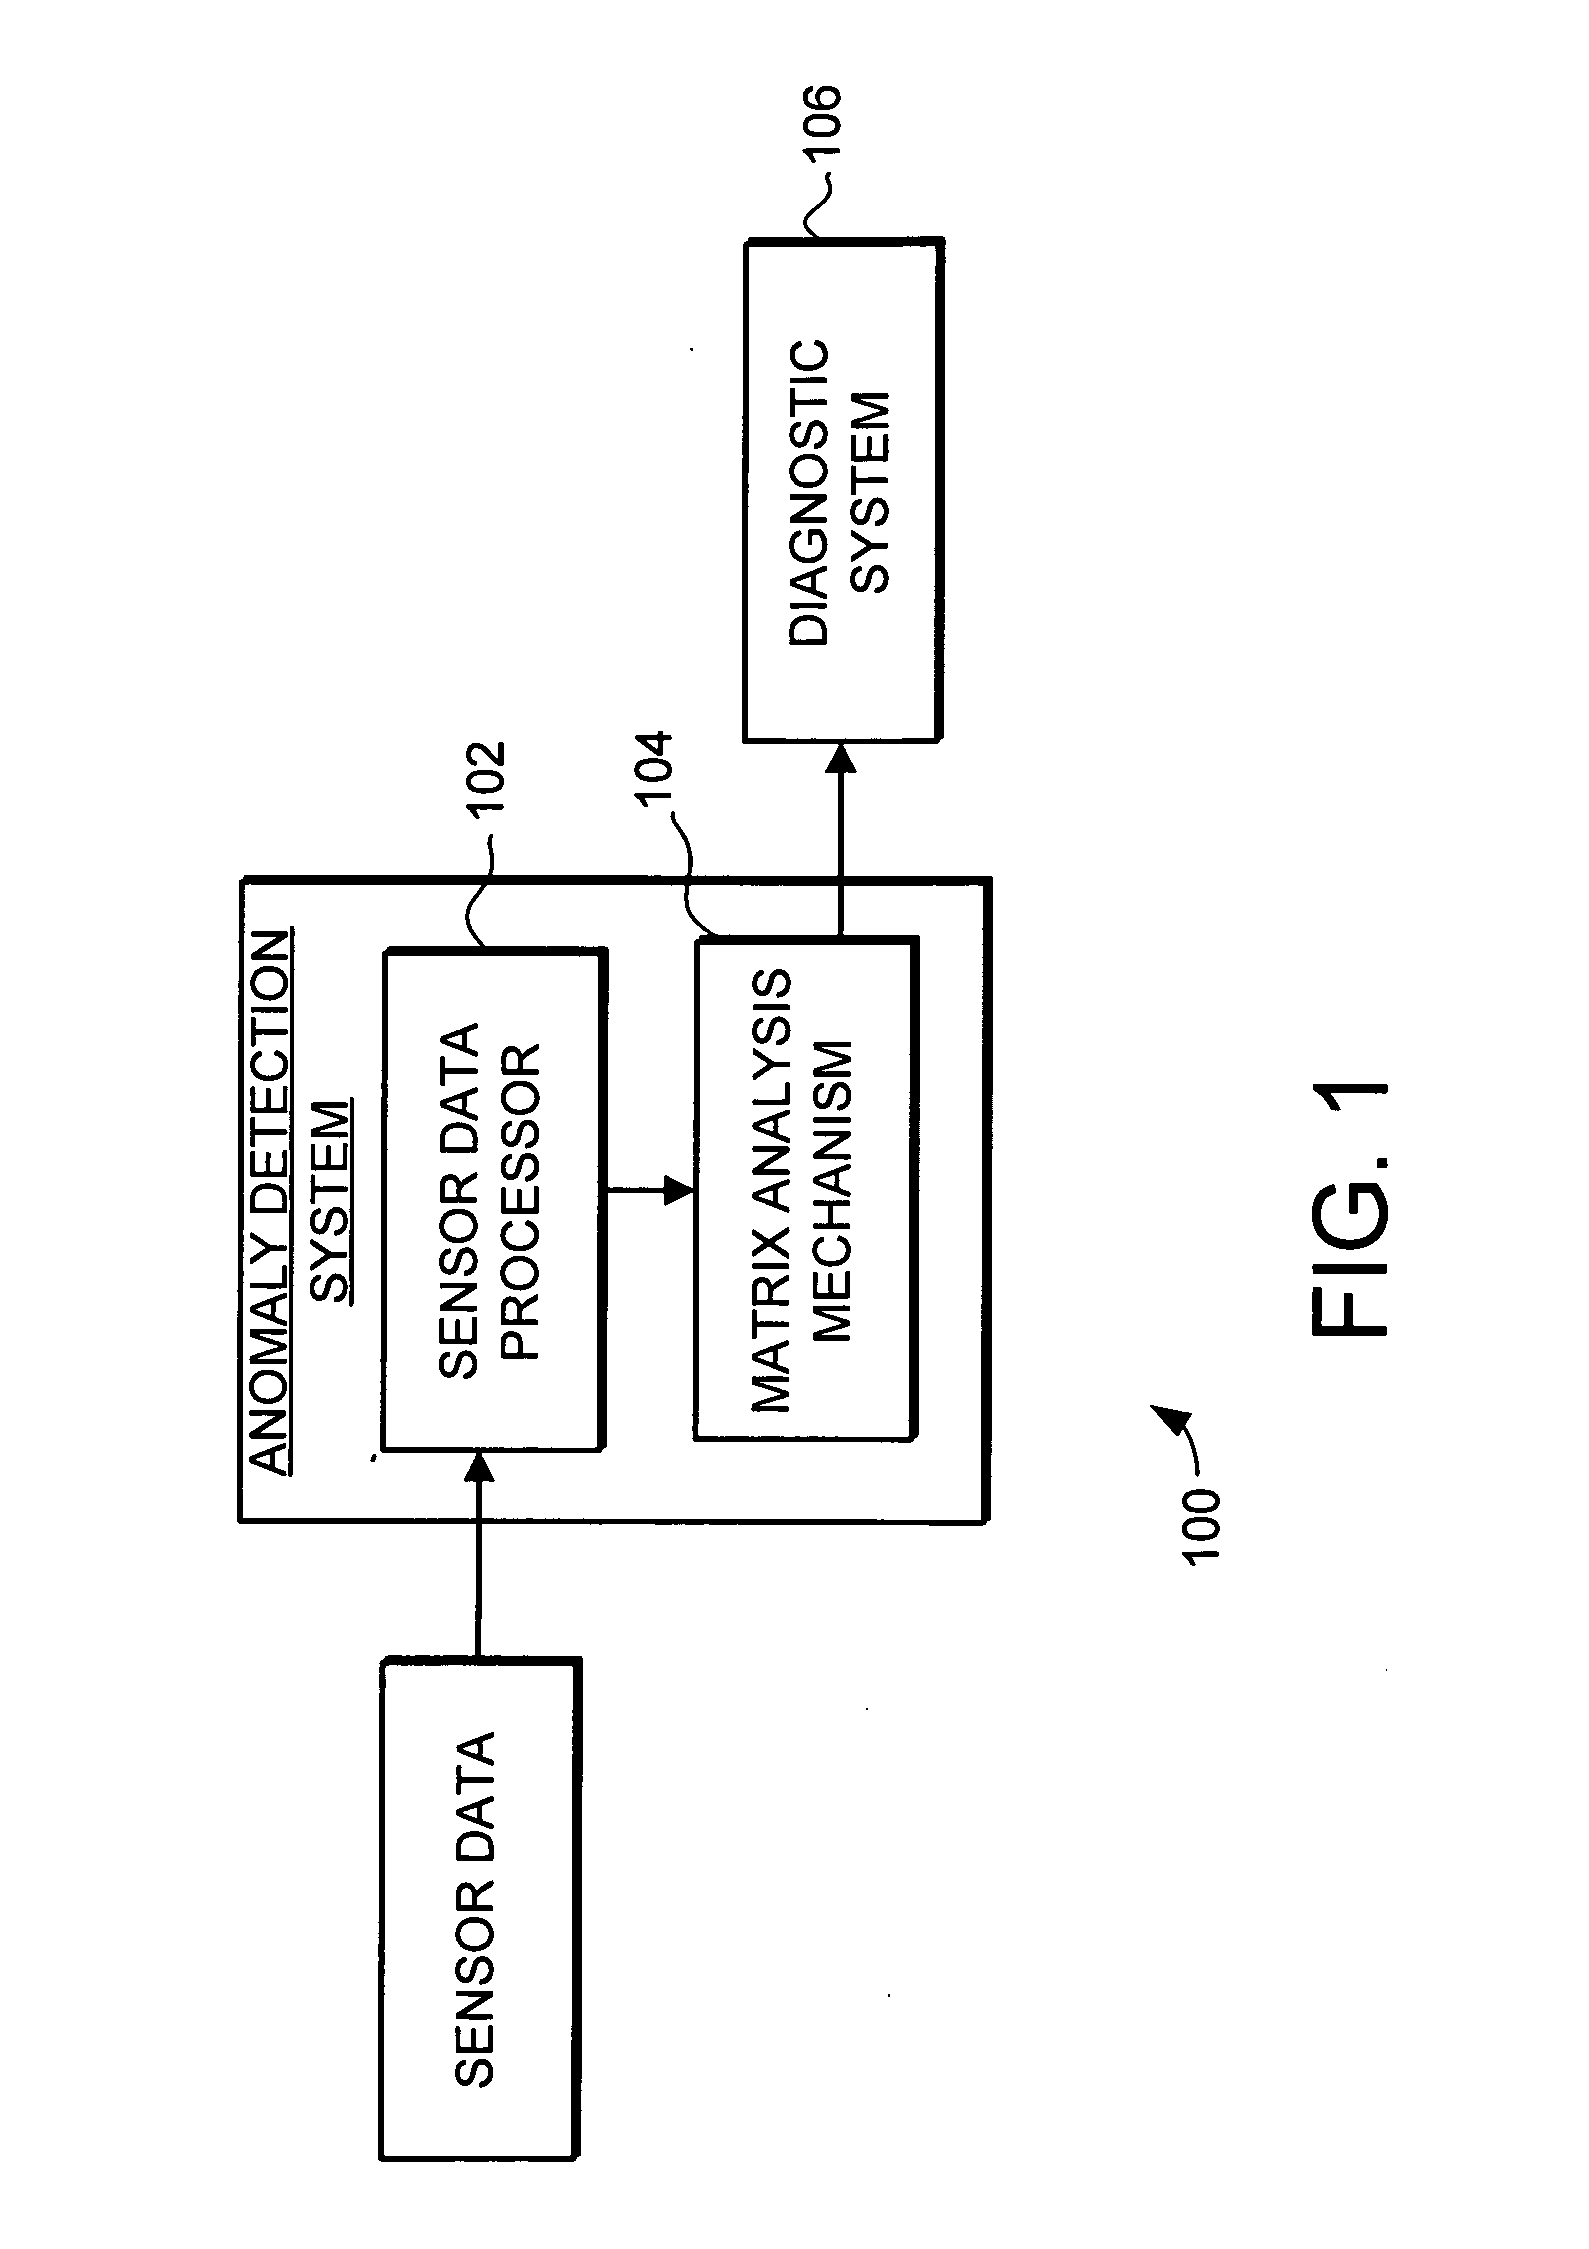 System and method for turbine engine anomaly detection